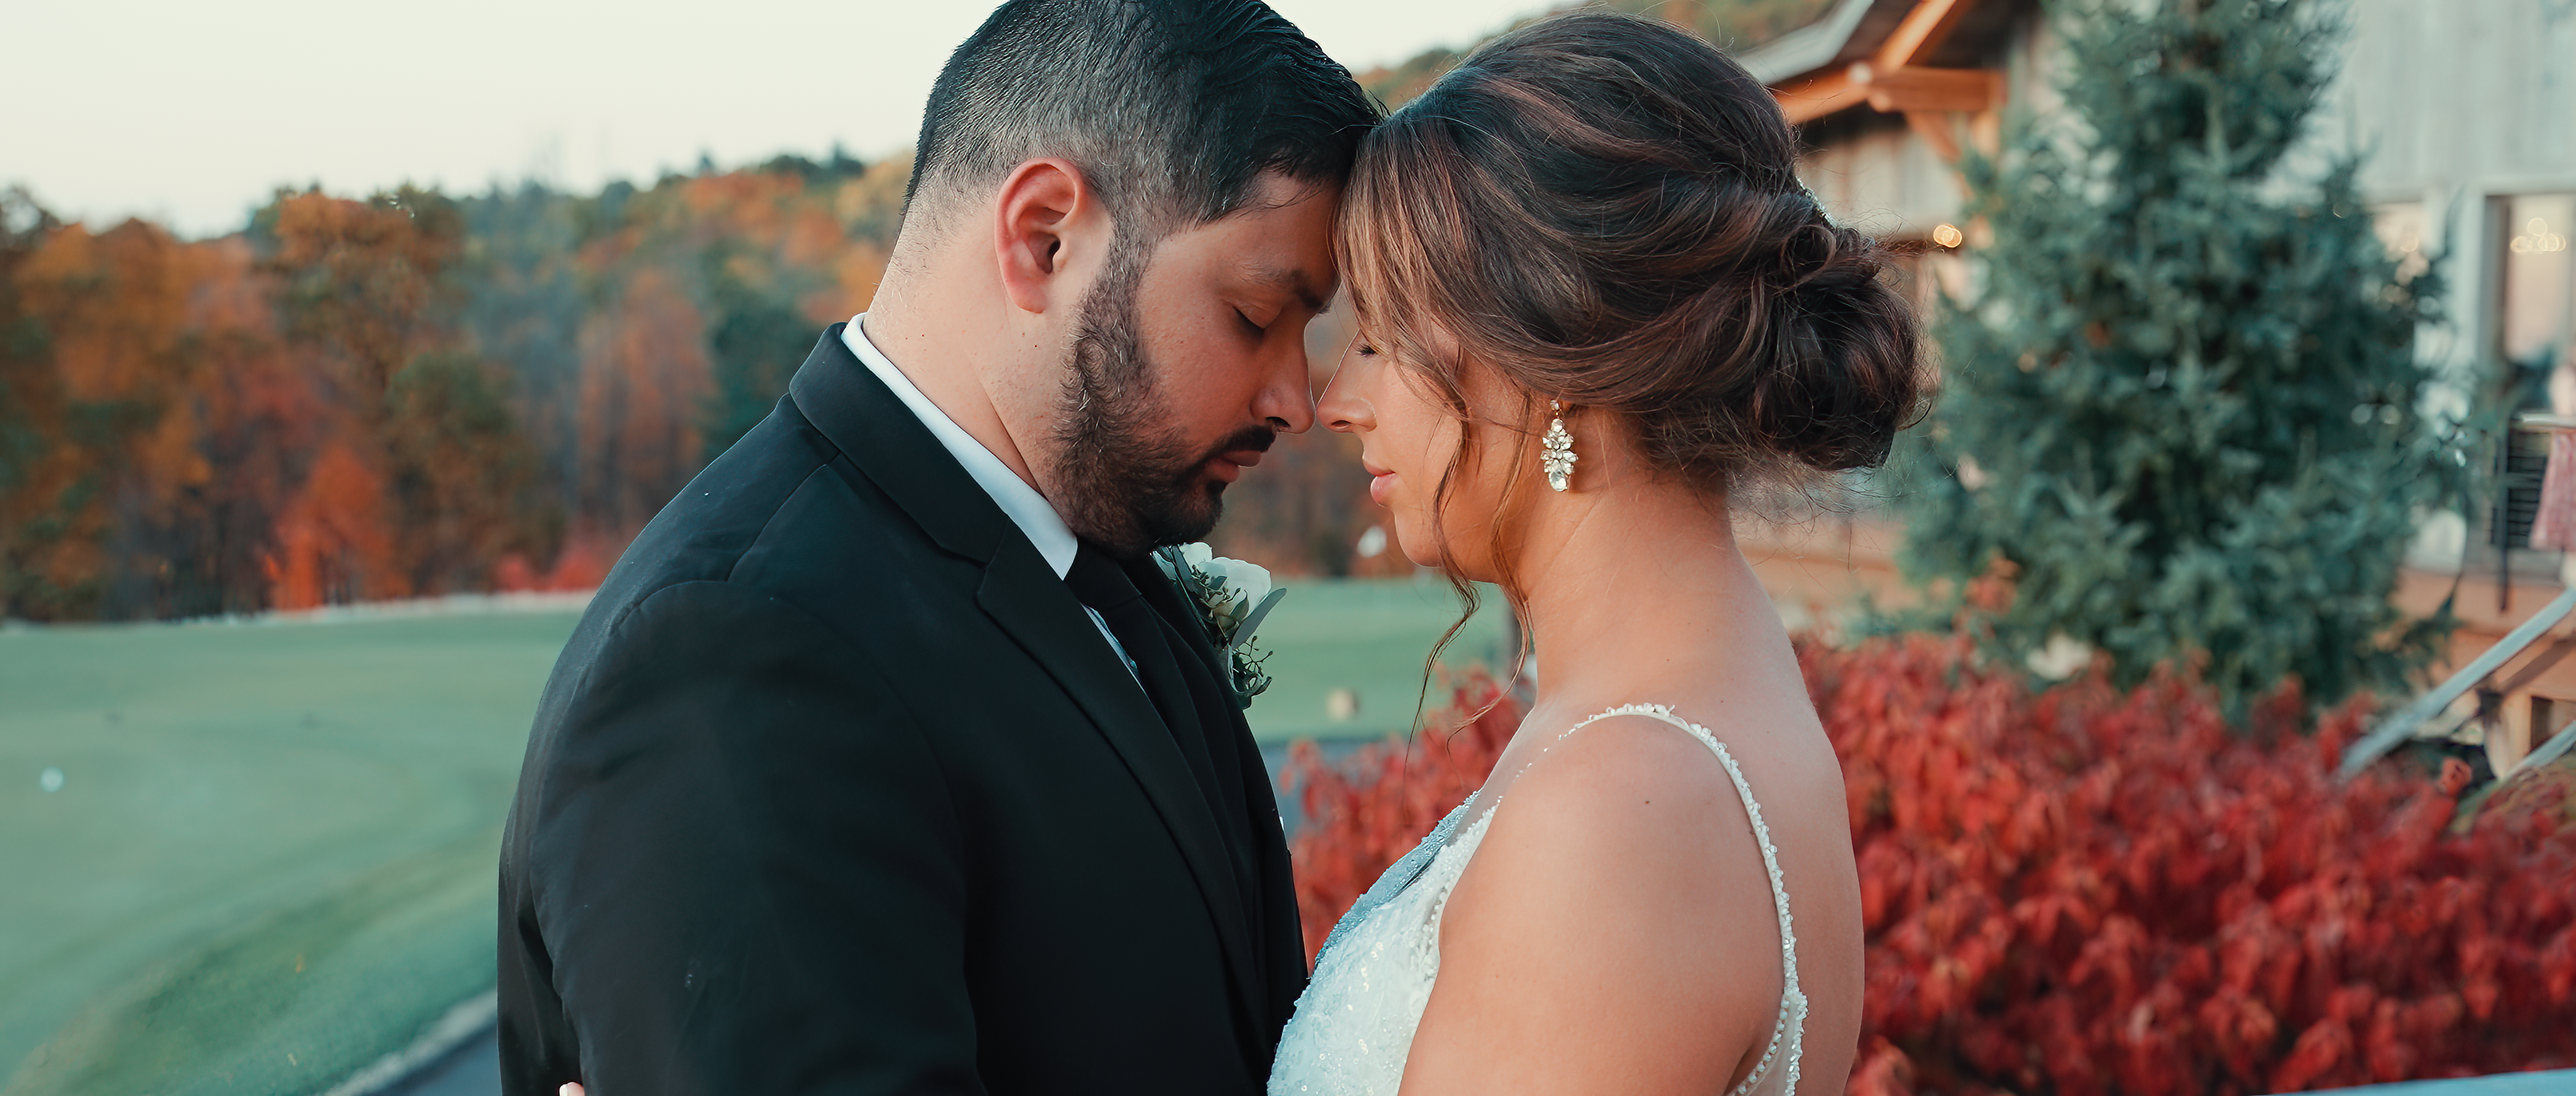 bride and groom touching foreheads wedding videography